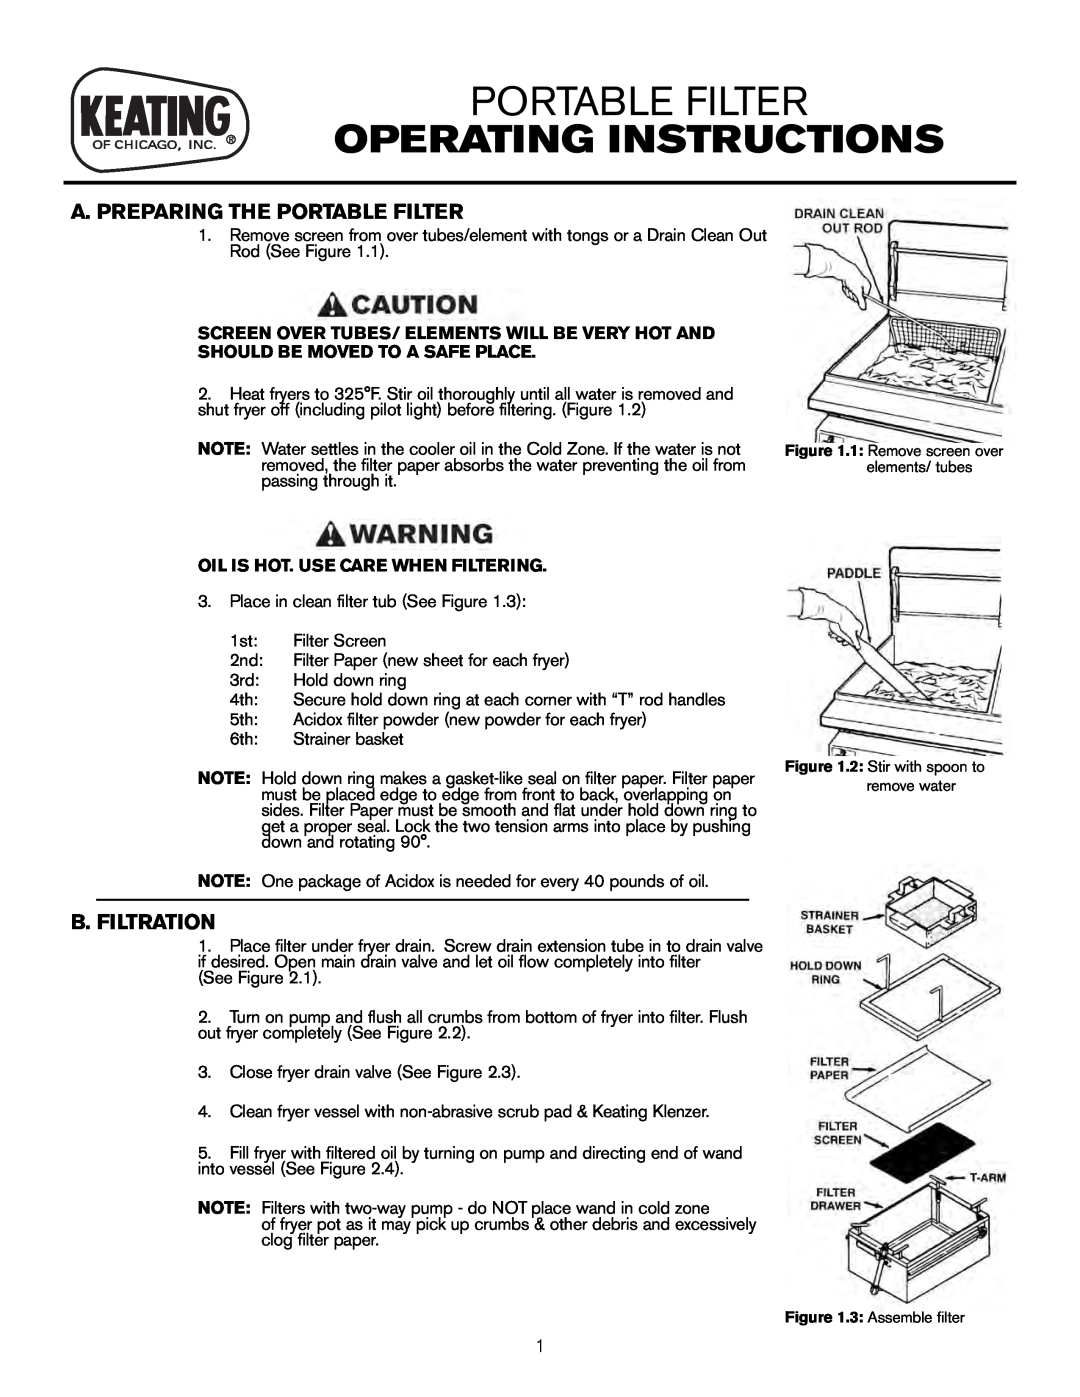 Keating Of Chicago LB-65, LB-200 user manual Operating Instructions, A. Preparing The Portable Filter, B.Filtration 